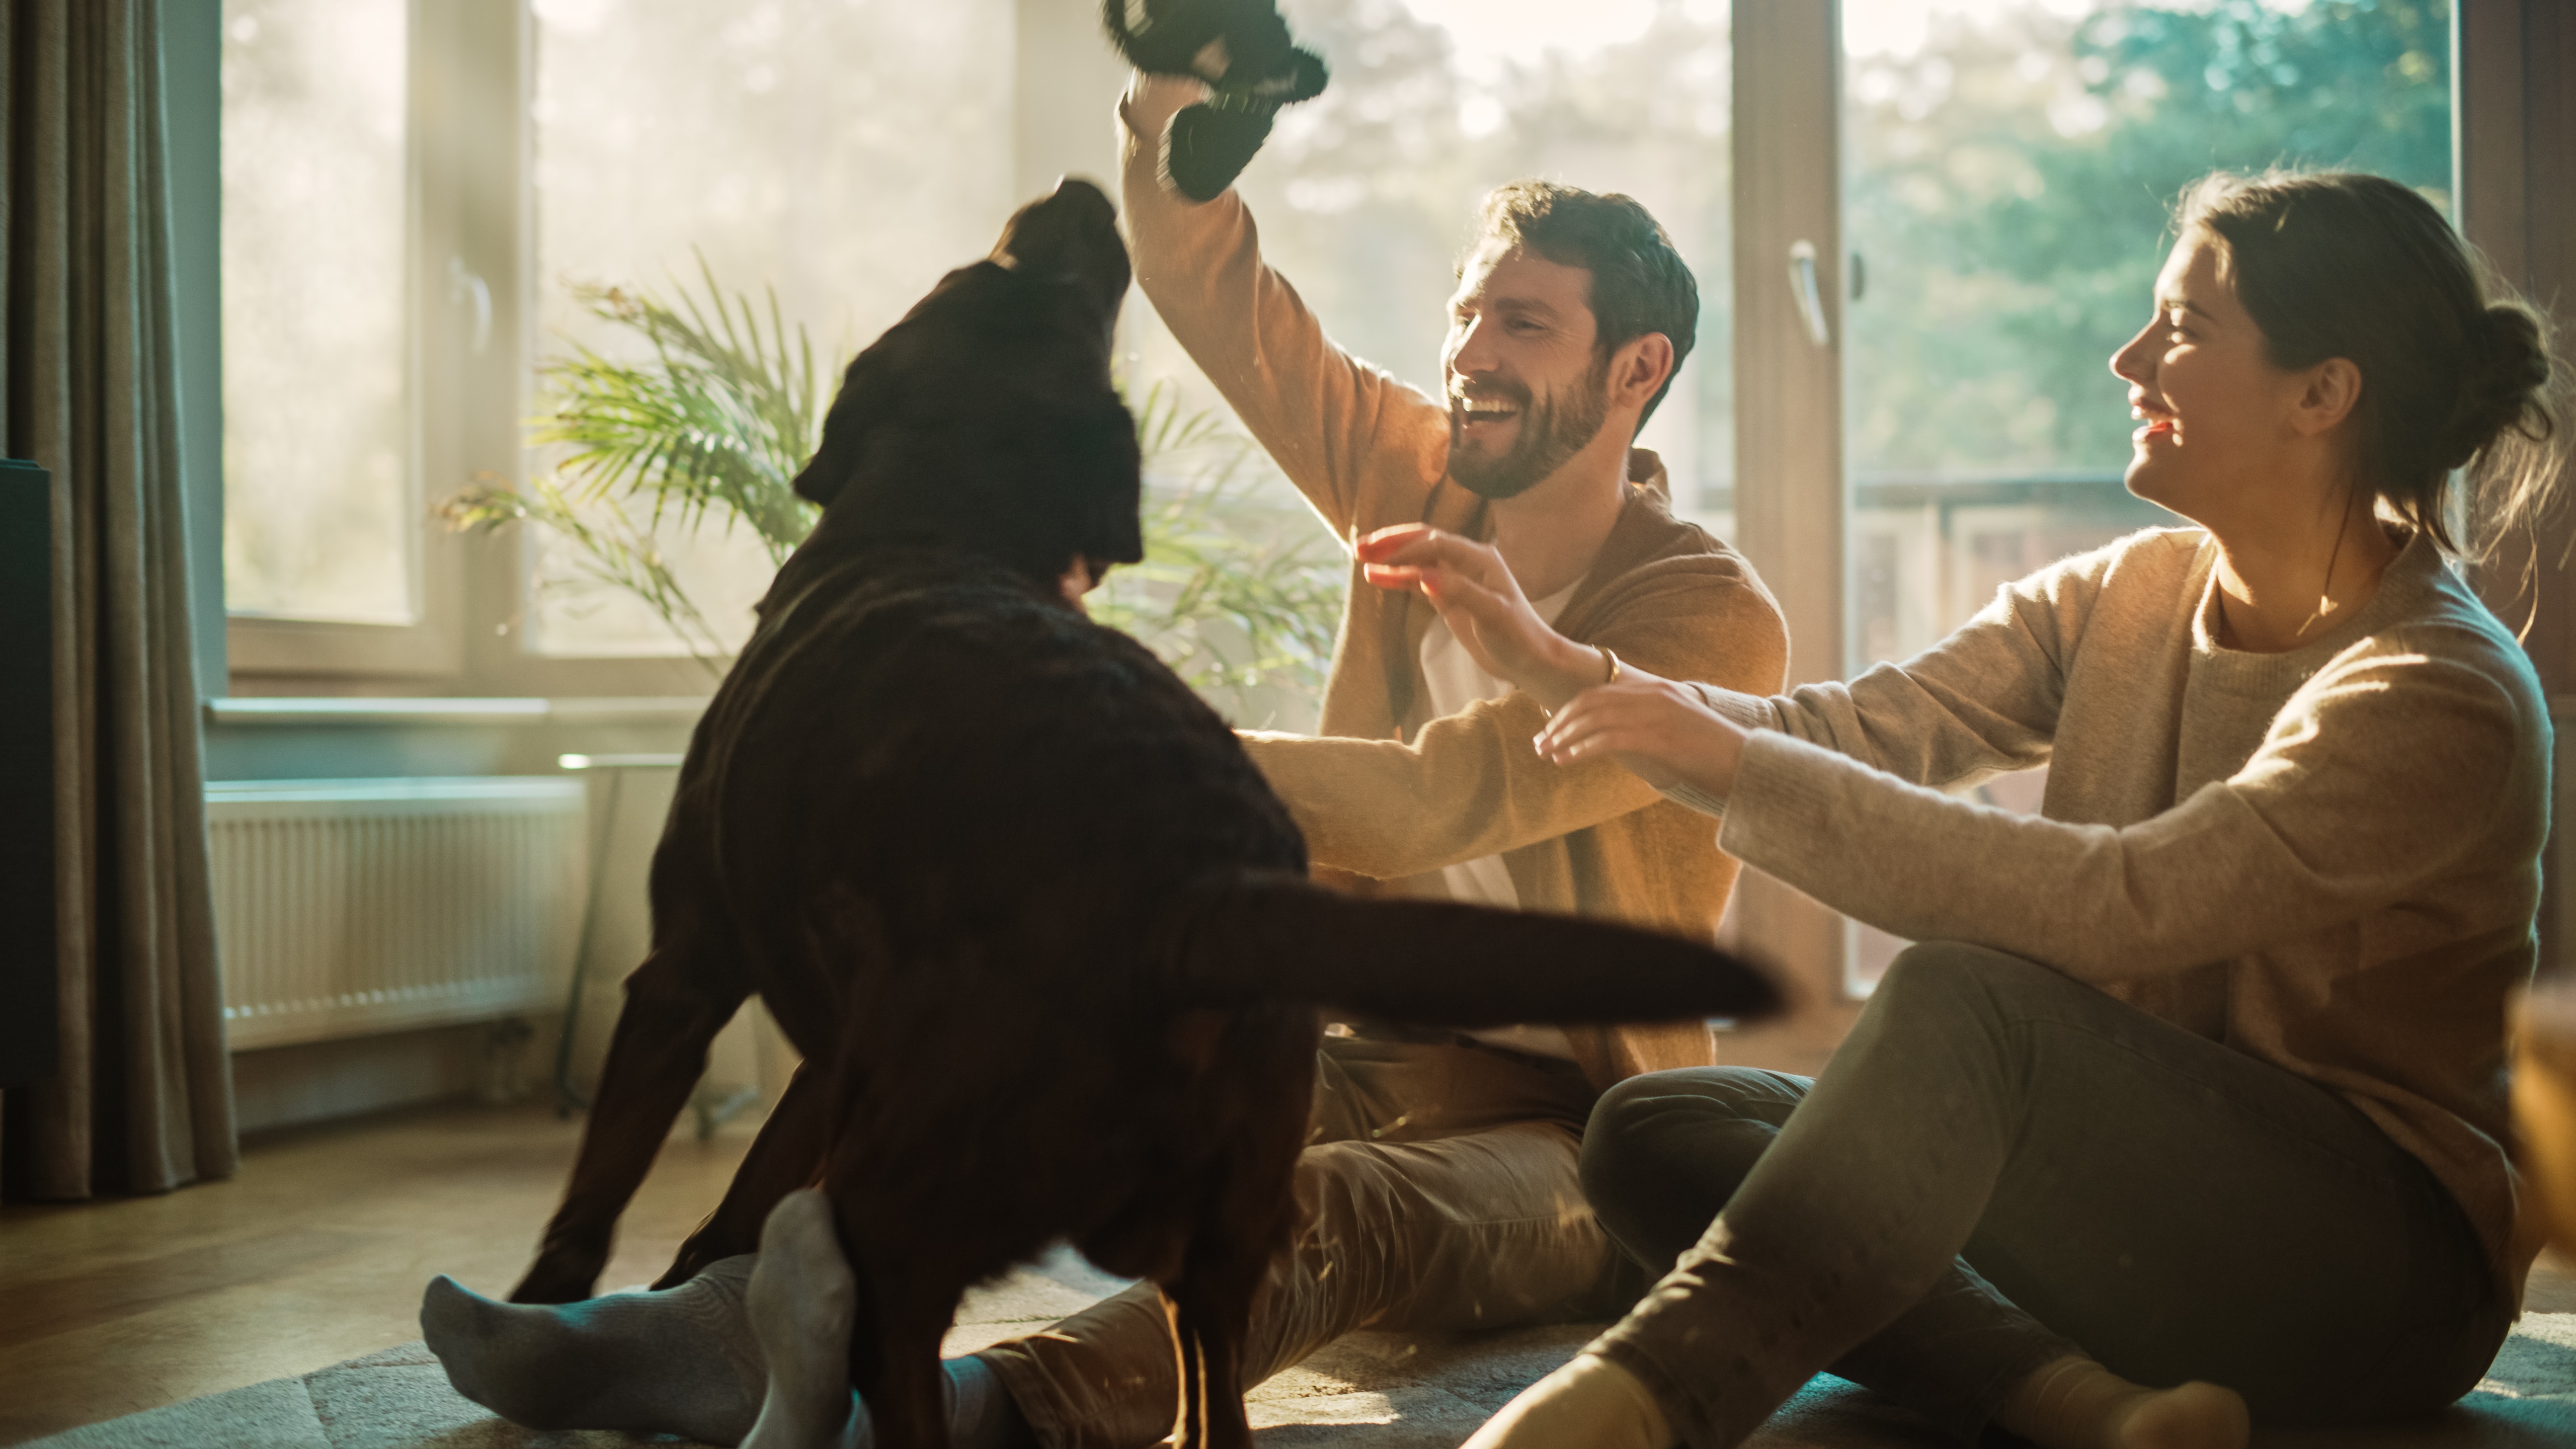 A happy couple playing with their dog at home | Source: Shutterstock